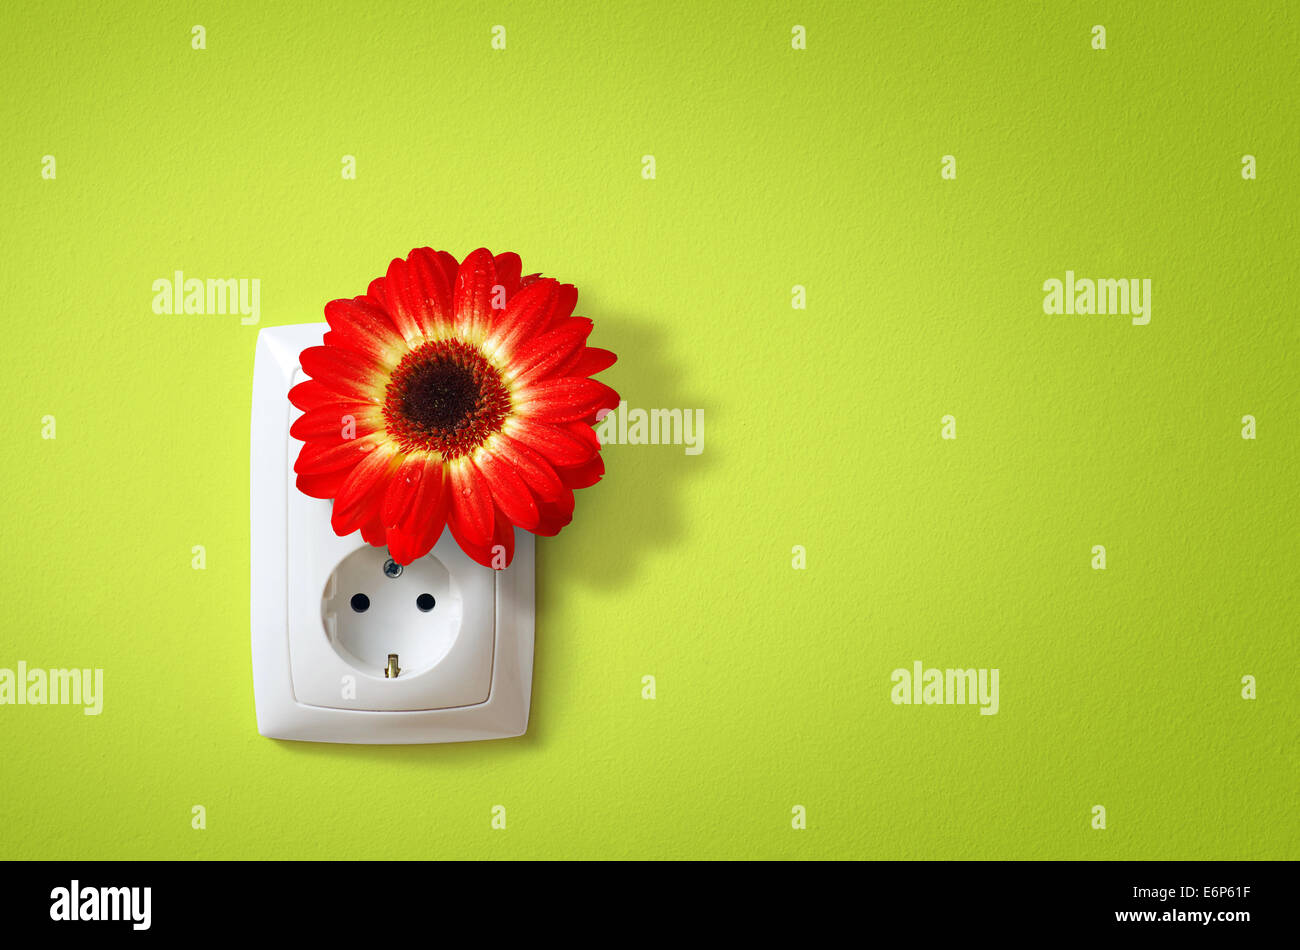 Flower in electric socket. Ecology concept of electricity friends with Nature. Stock Photo